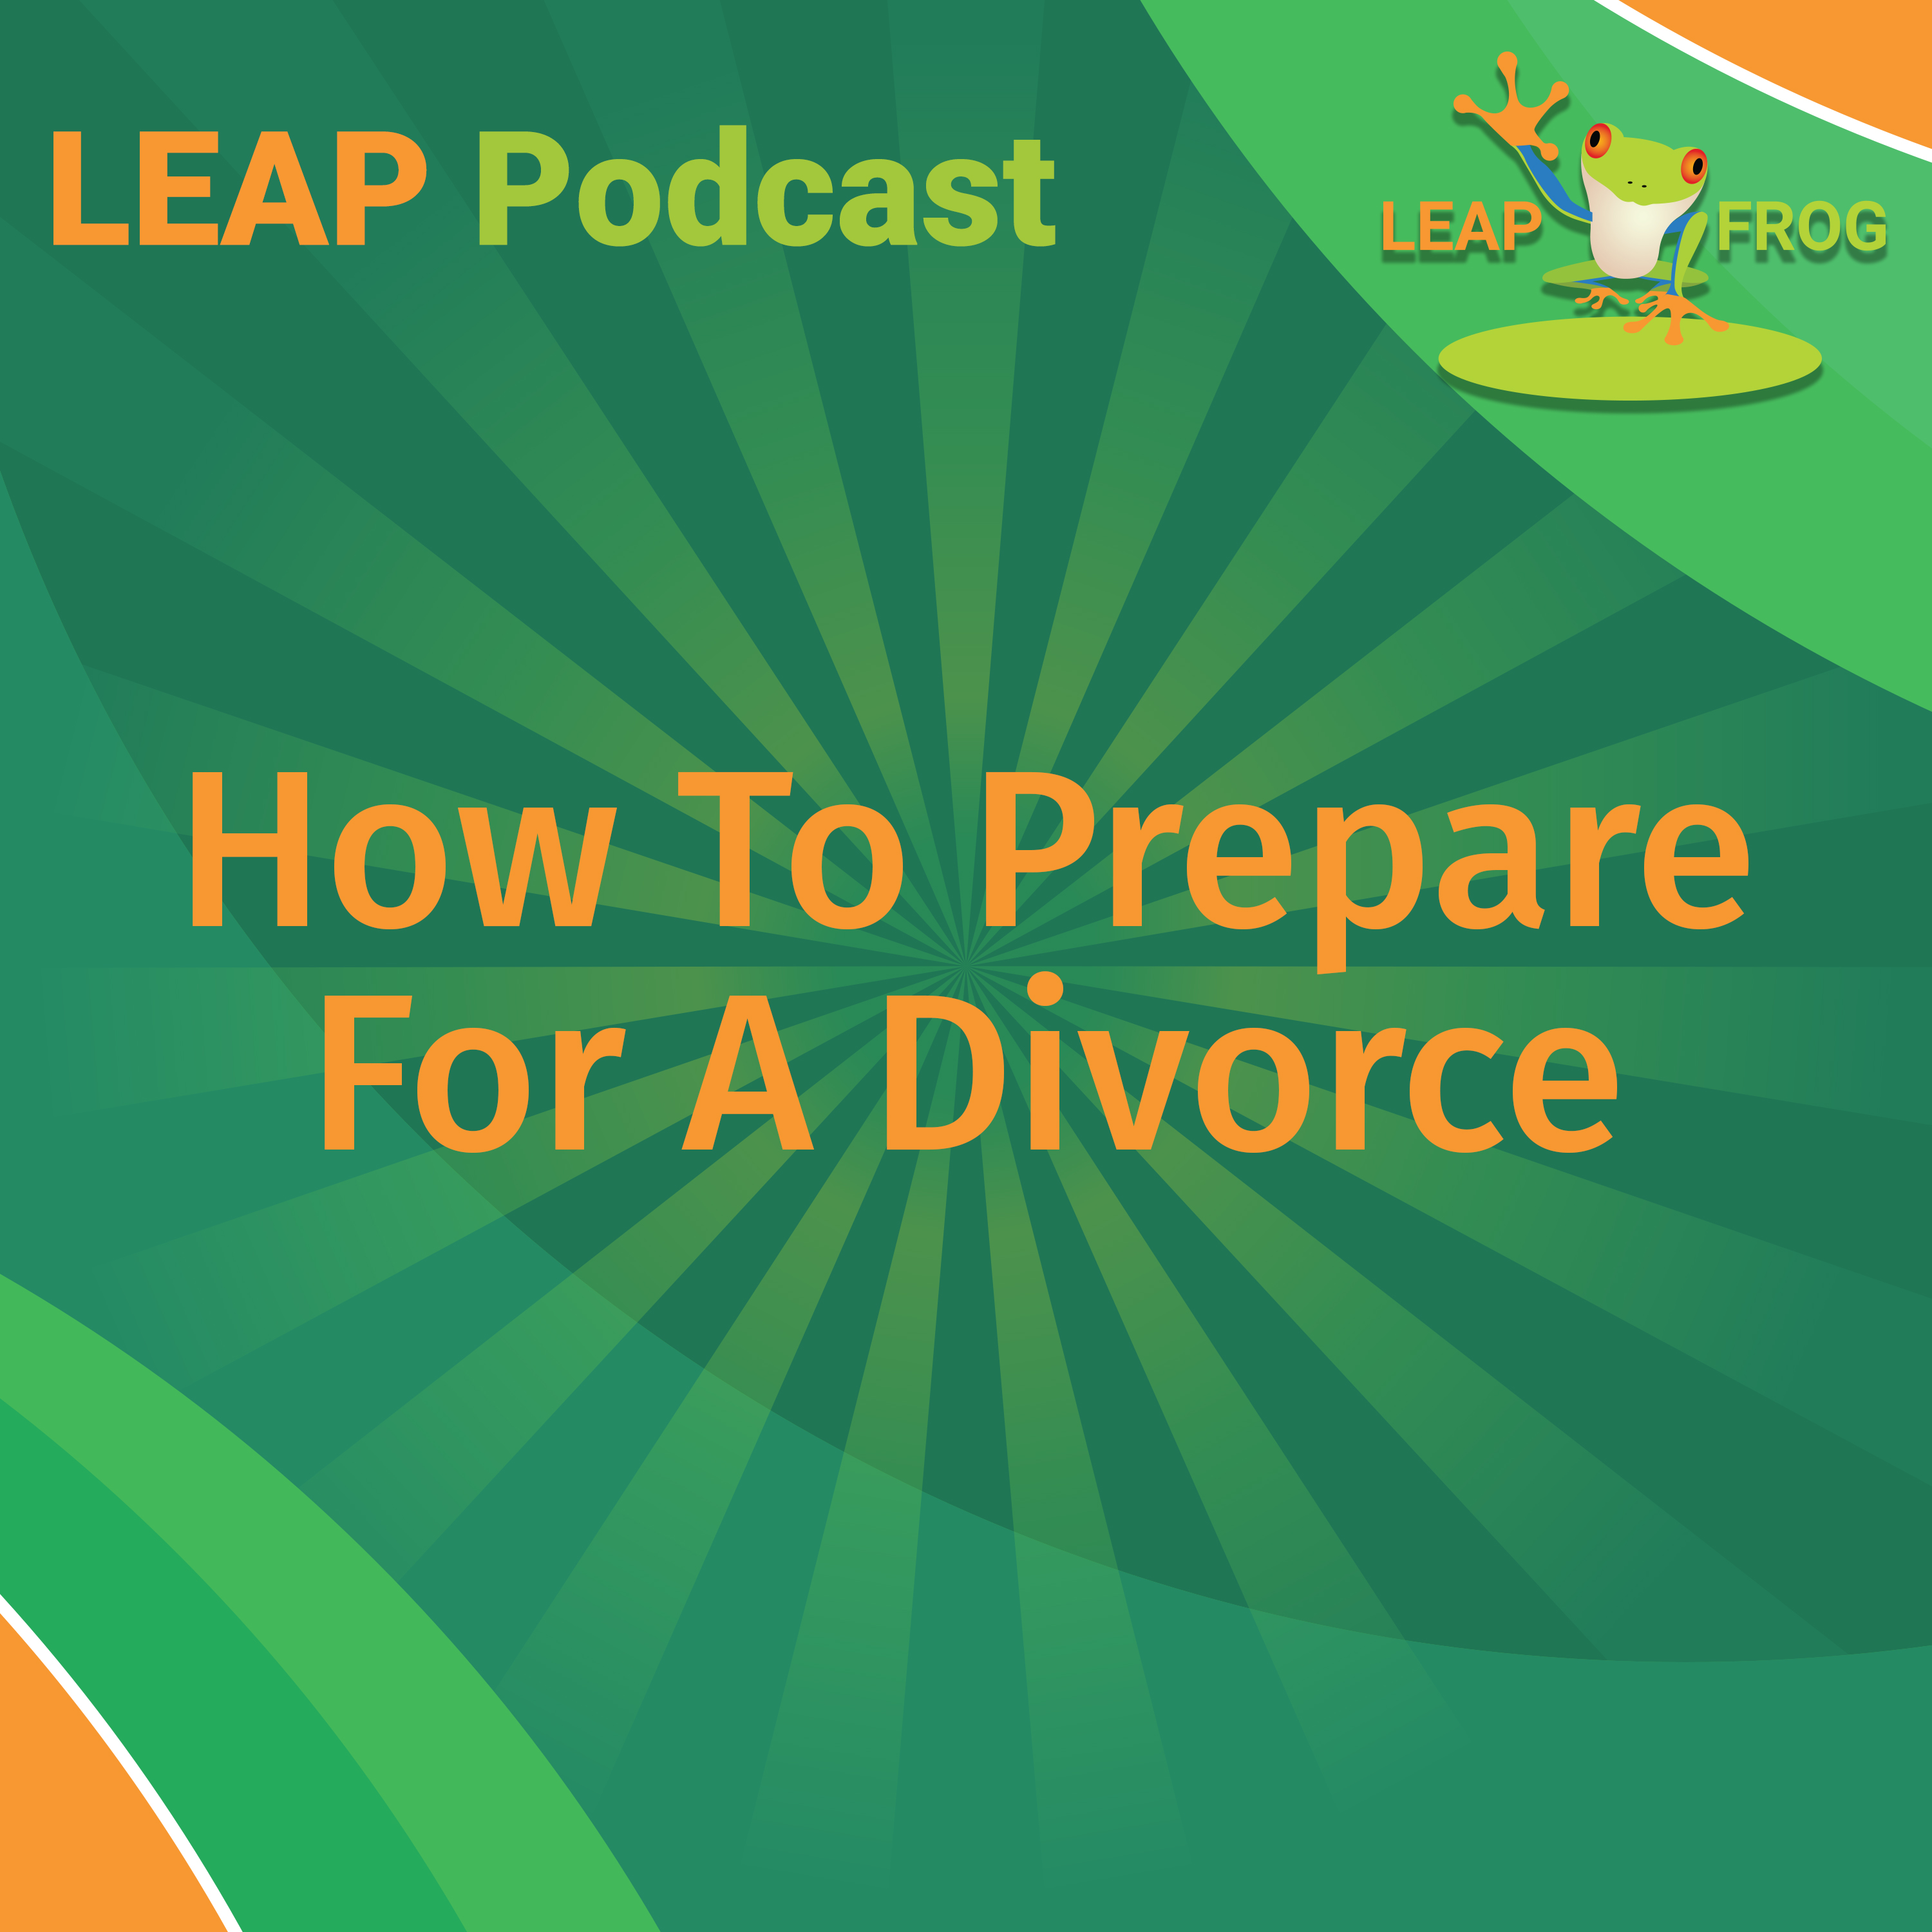 LEAP Podcast How To Prepare For A Divorce episode cover art